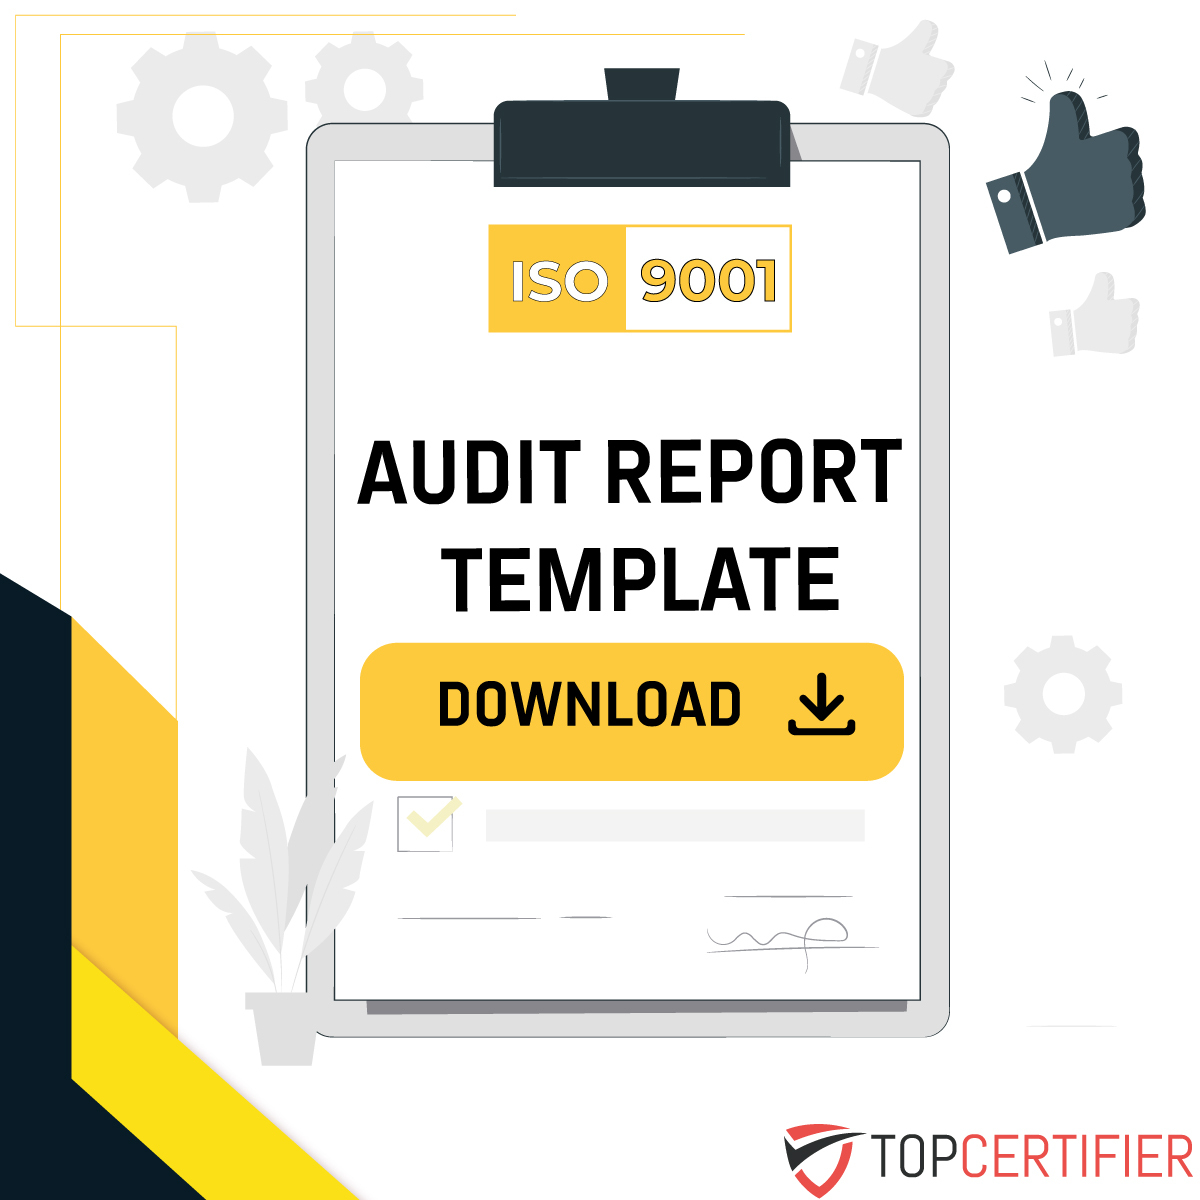 ISO 9001 Audit Report Template